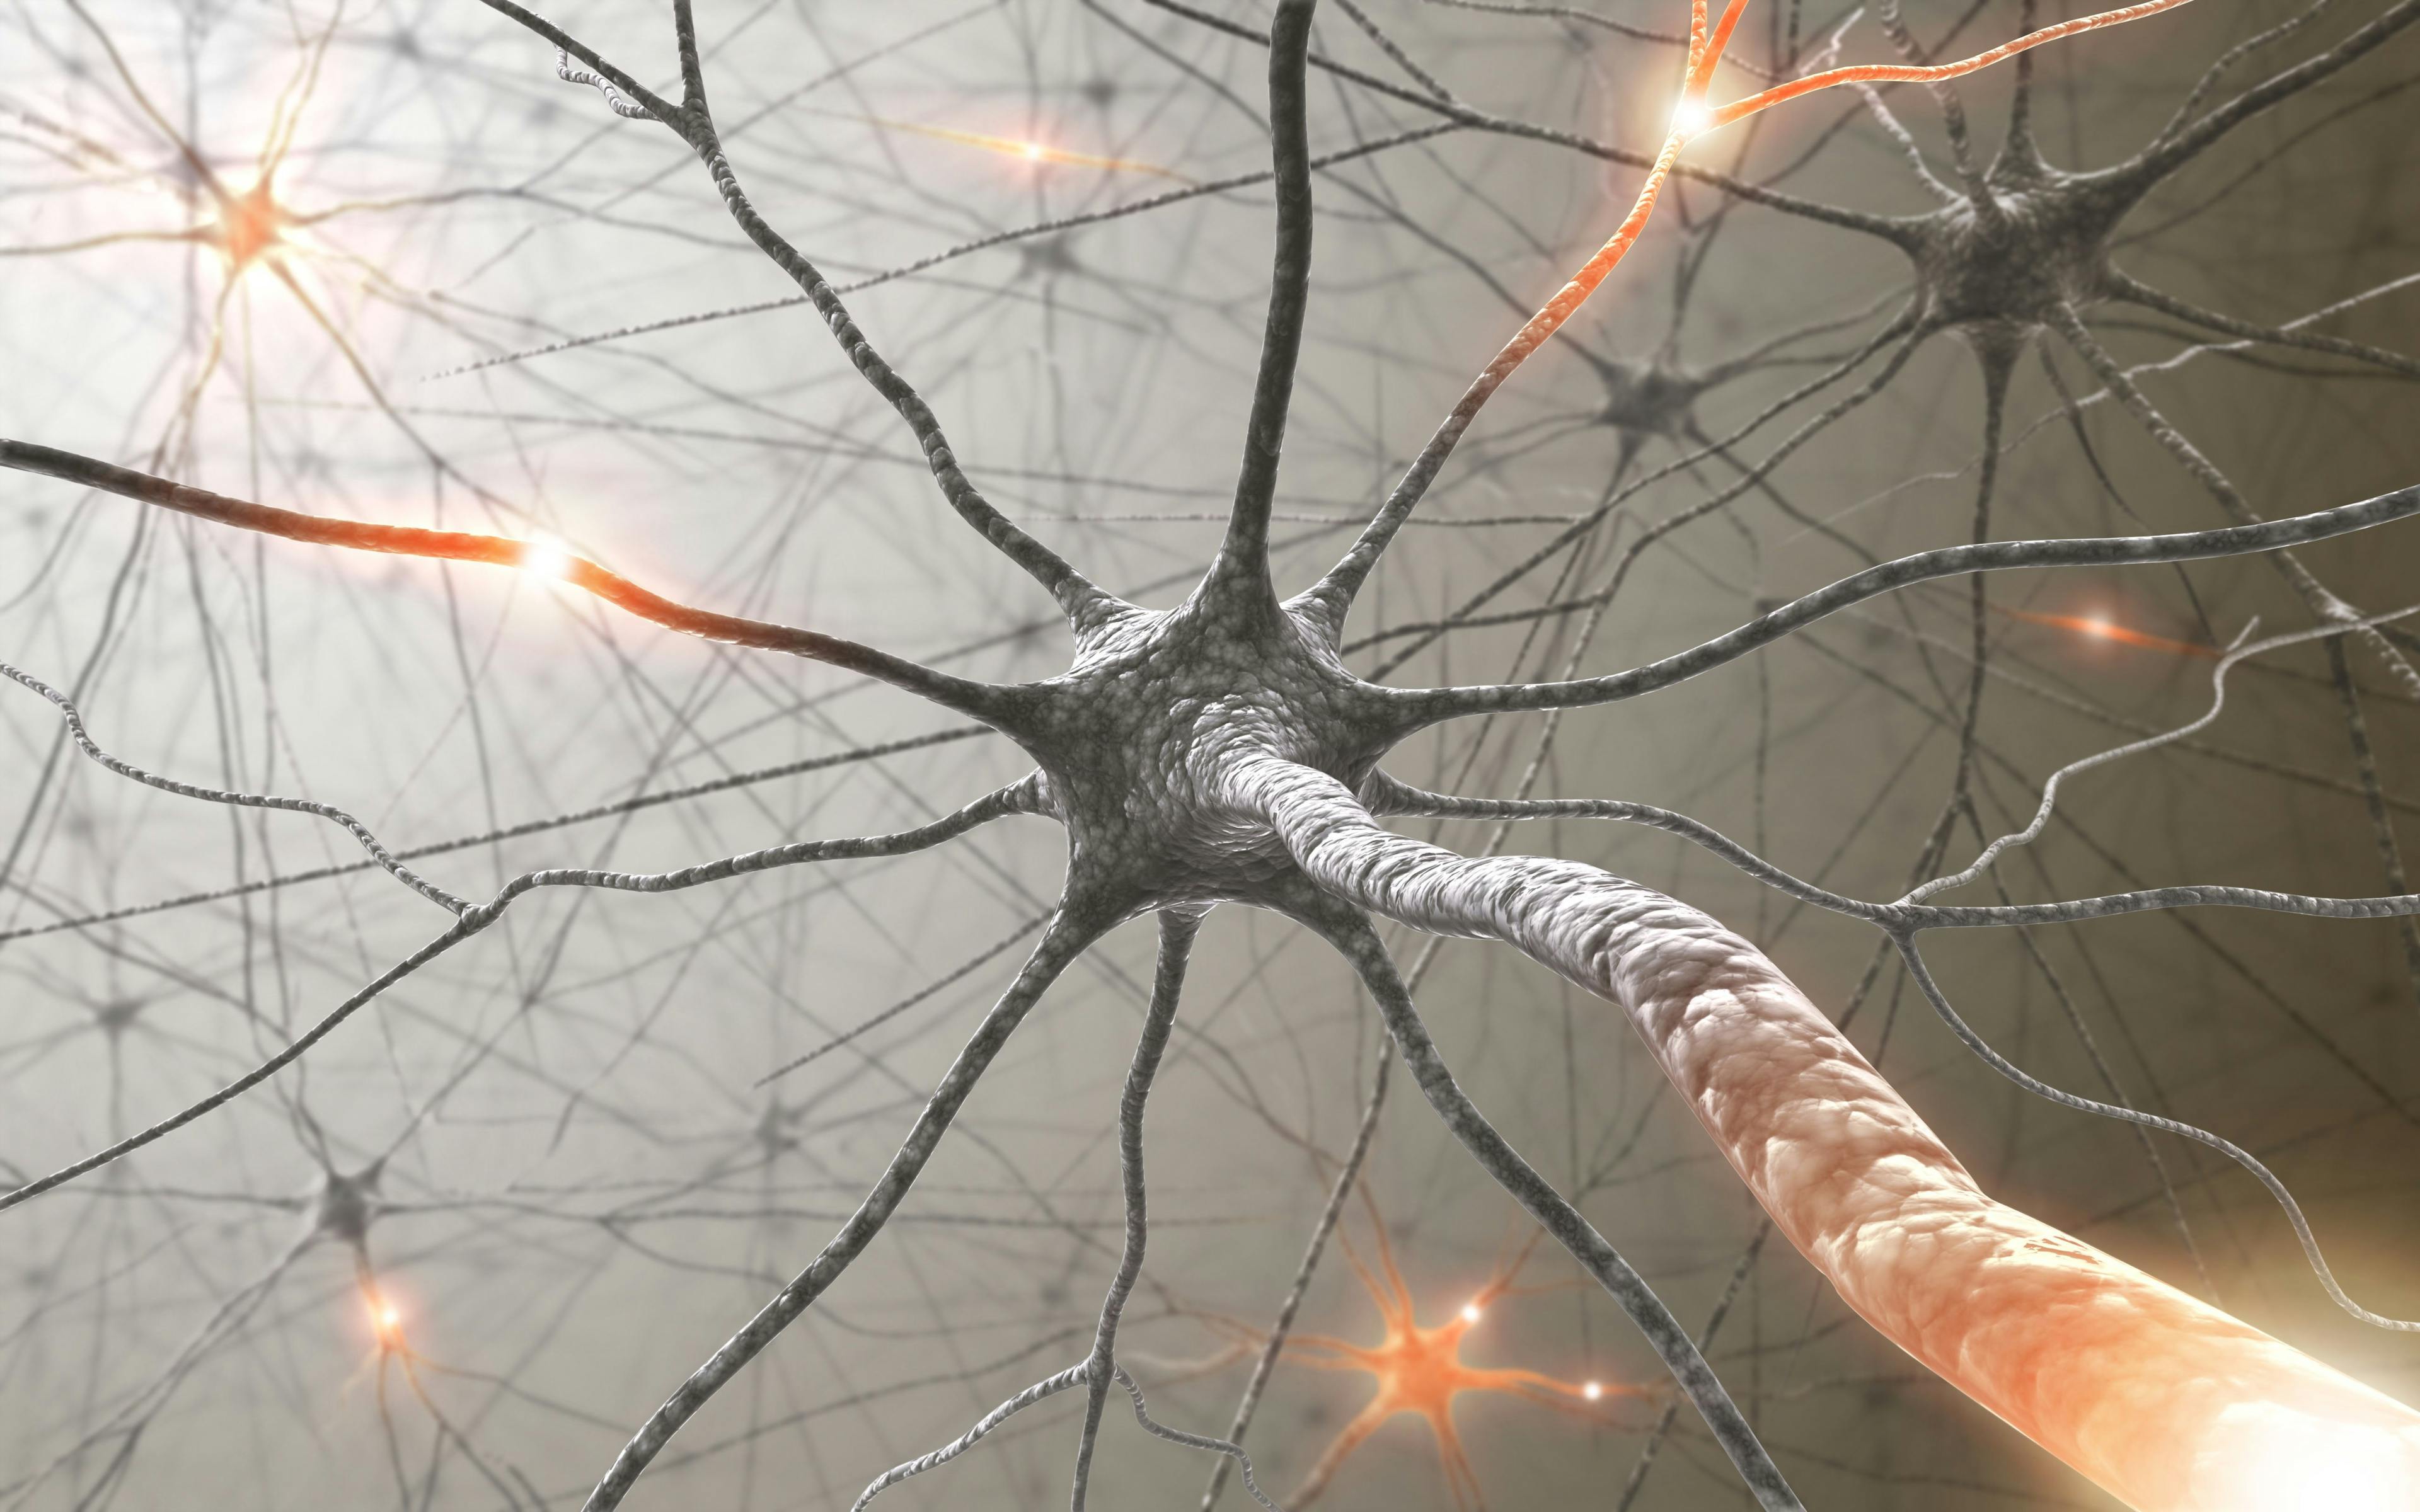 Giant Axonal Neuropathy Gene Therapy Needs Double-blind Trial Before BLA Submission